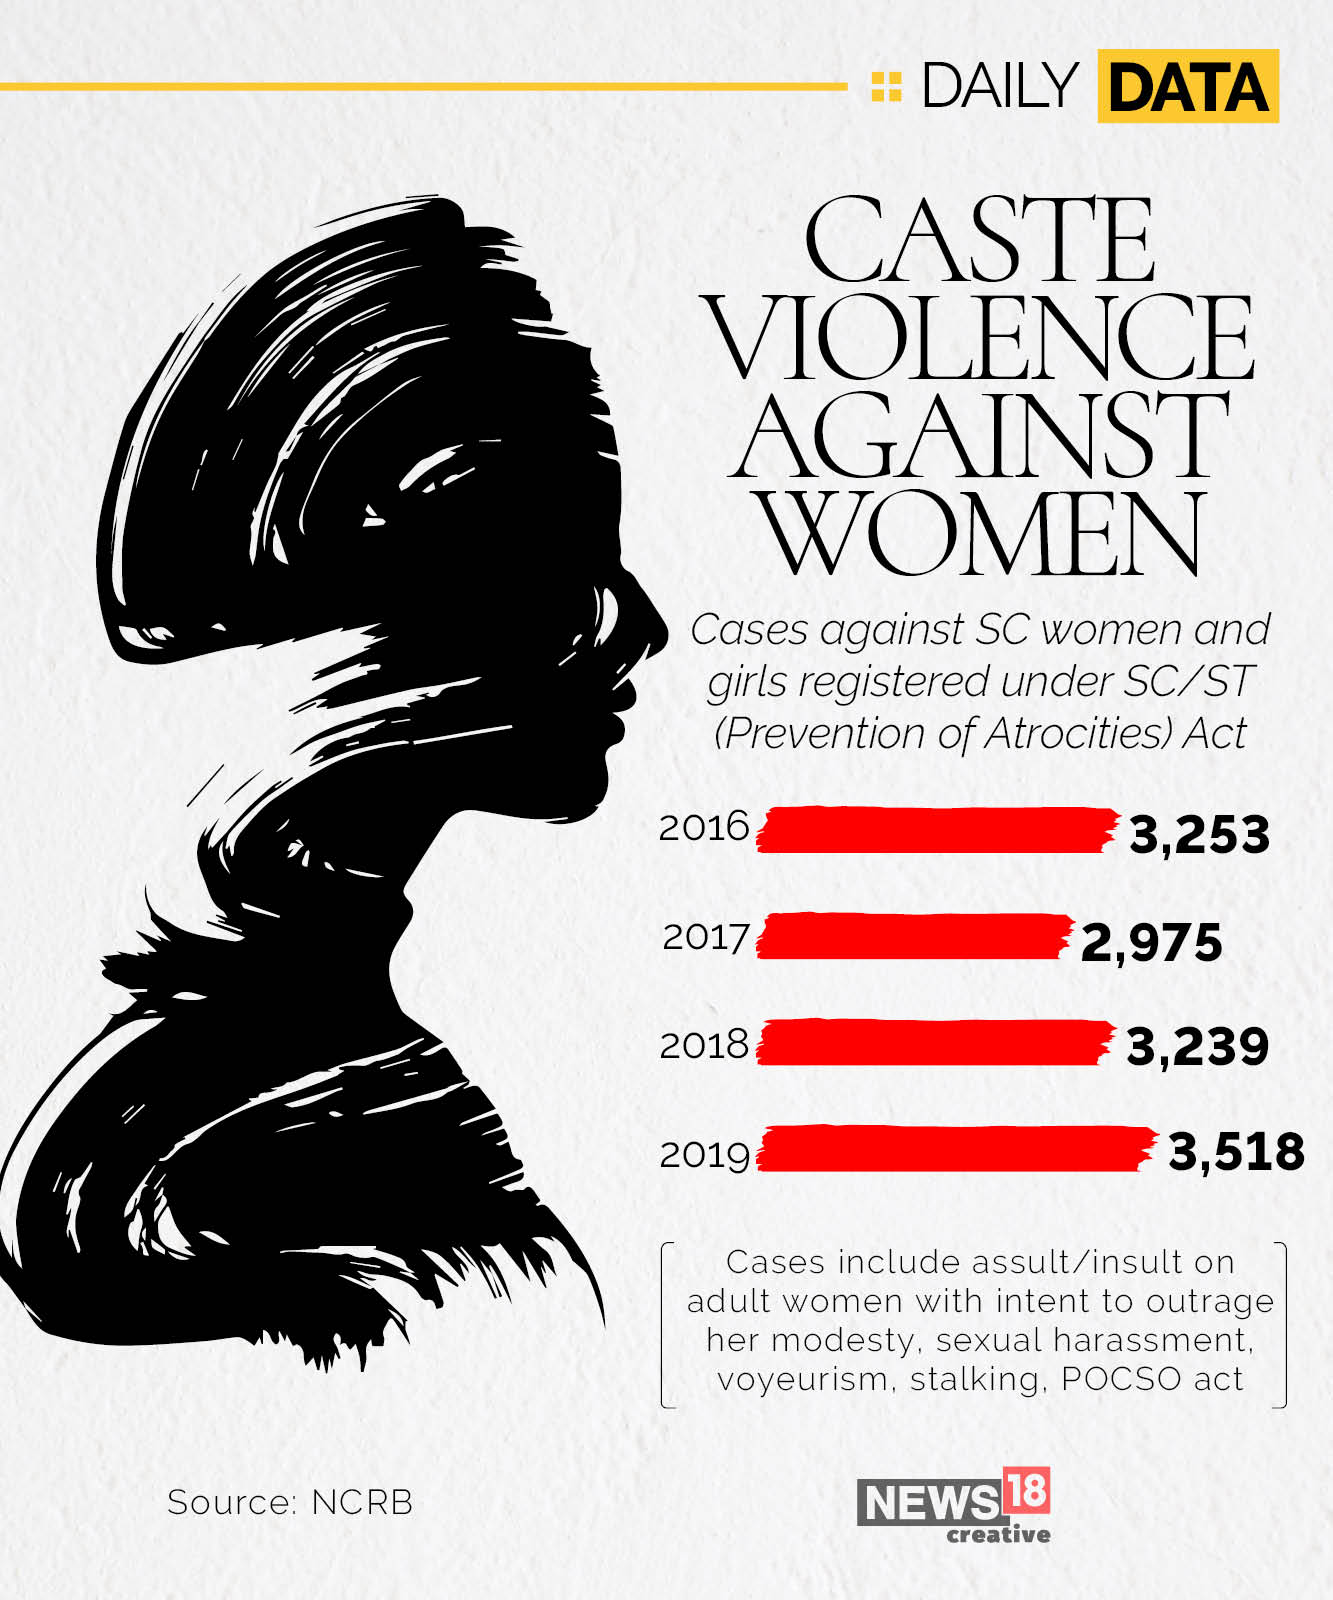 News by Numbers: A look at caste violence against women